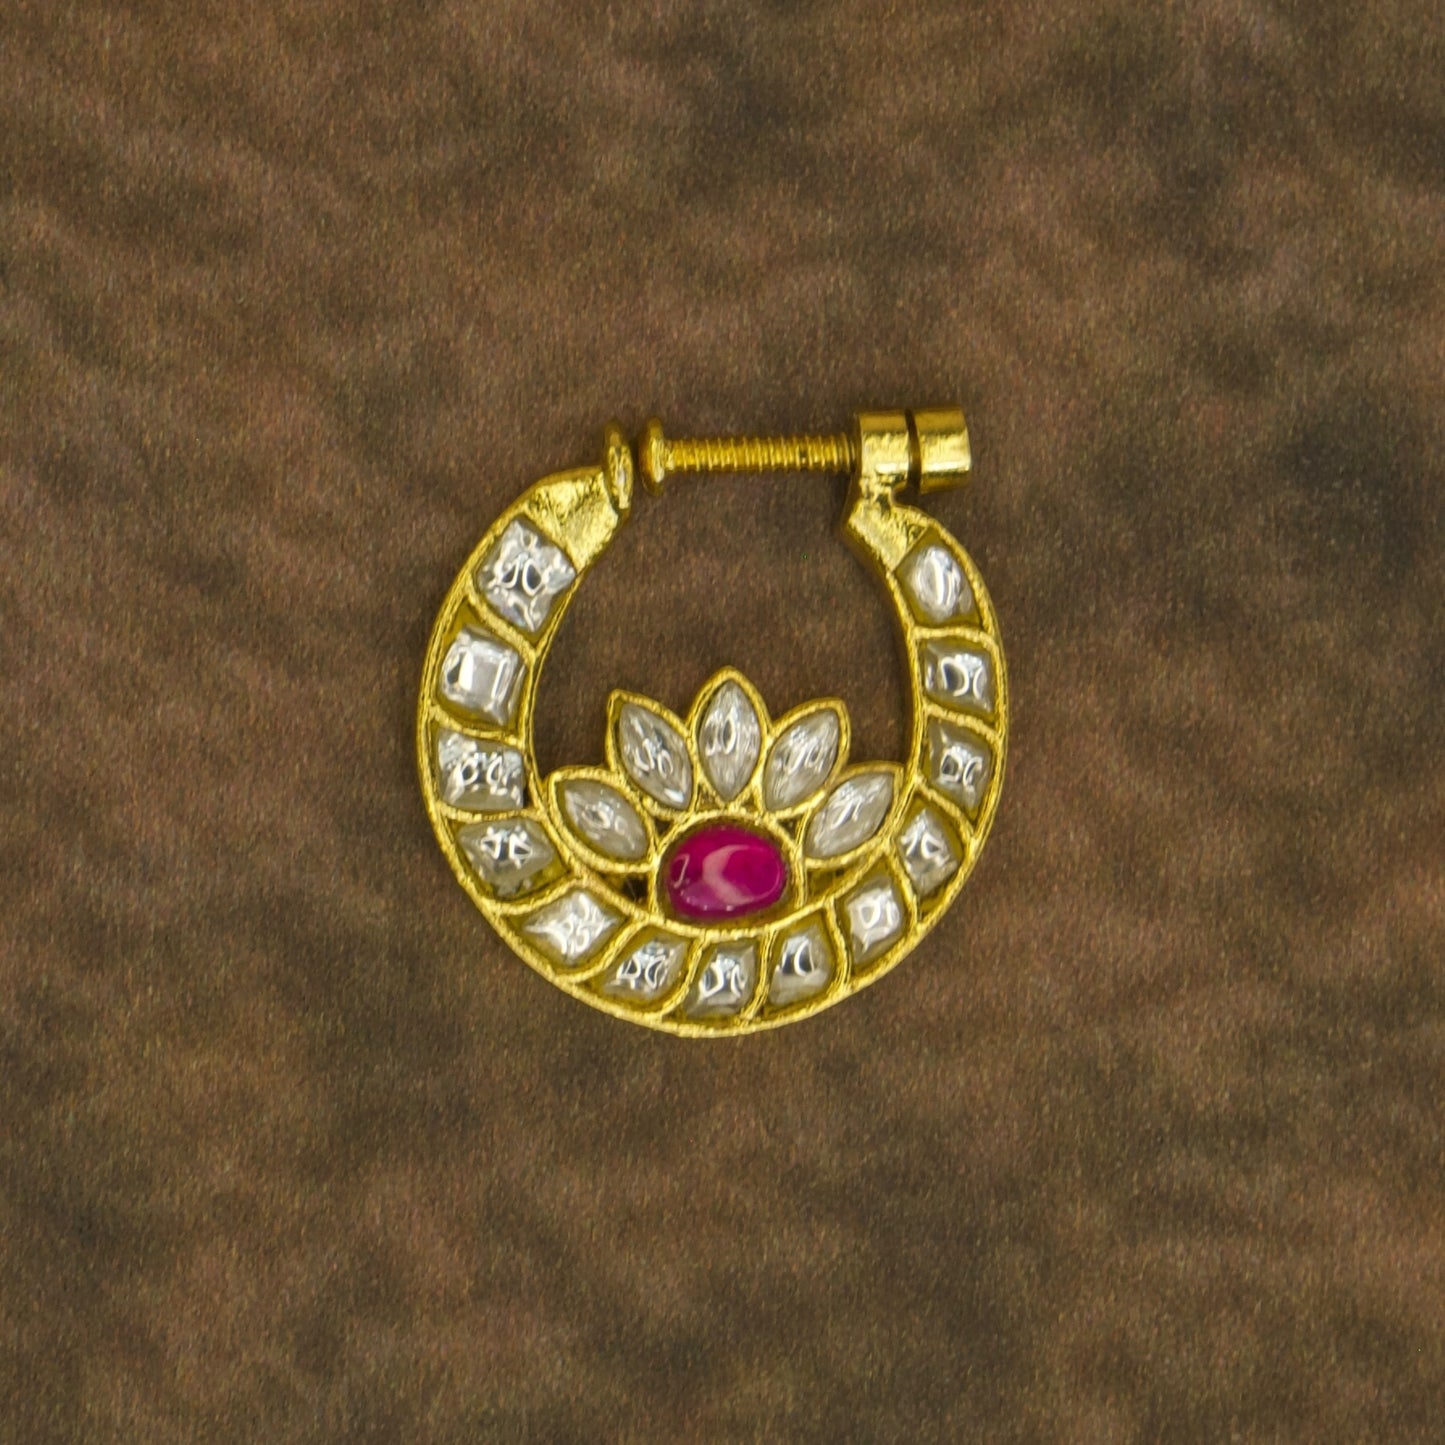 Exquisite Gold Plated Jadau Kundan Nose Ring with 22k gold plating. This product belongs to Jadau Kundan jewellery category